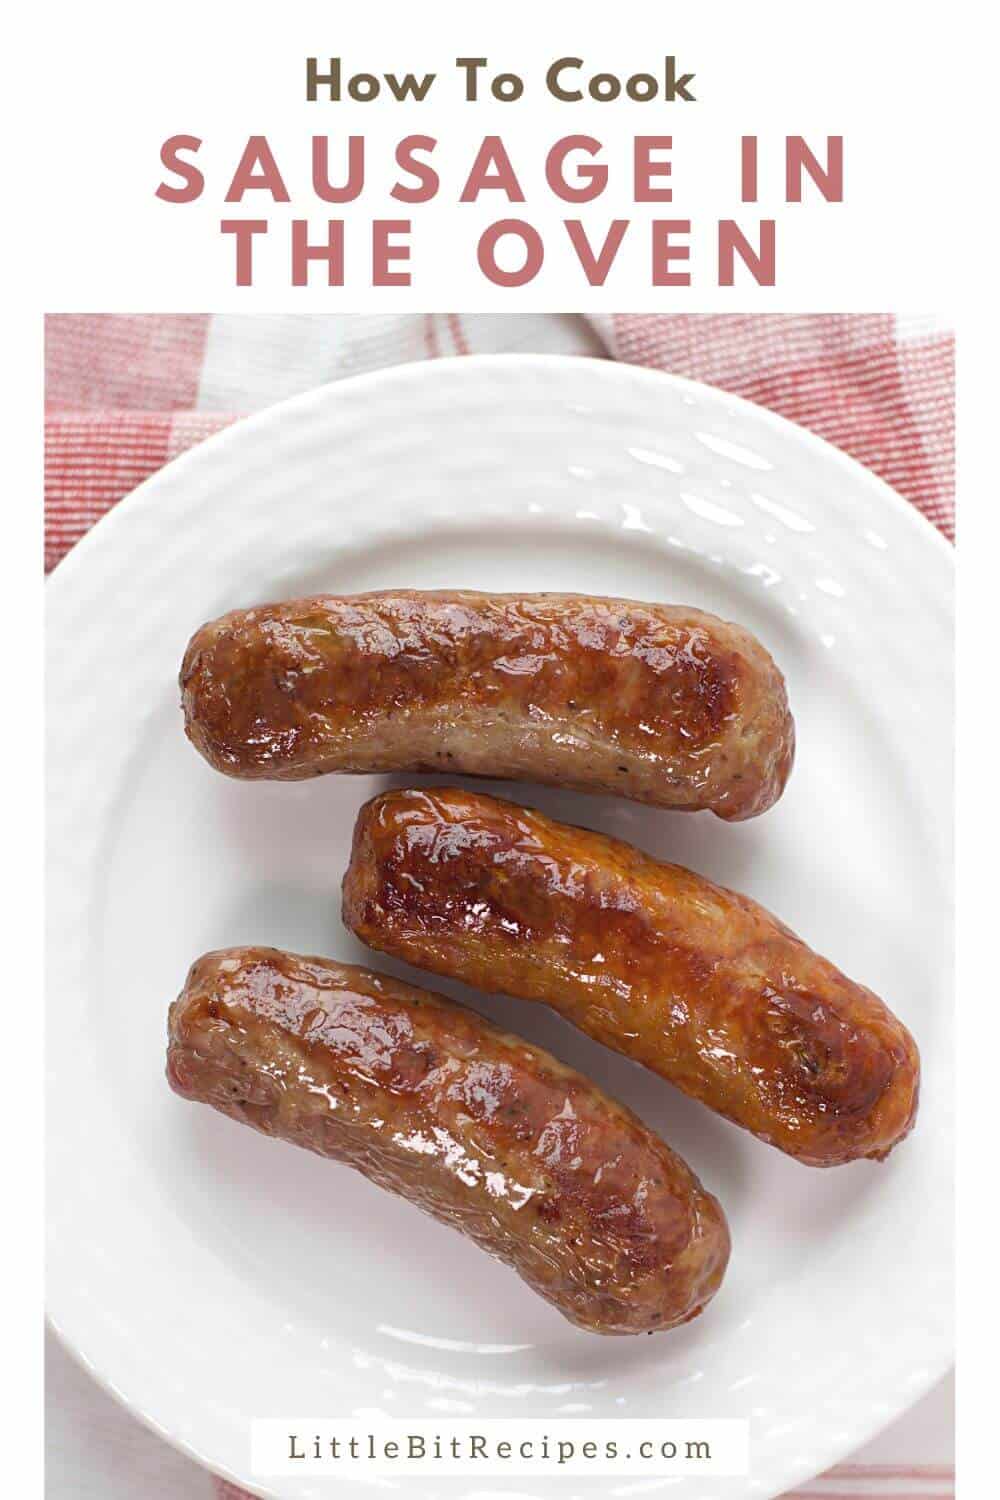 How to cook sausage in the oven.